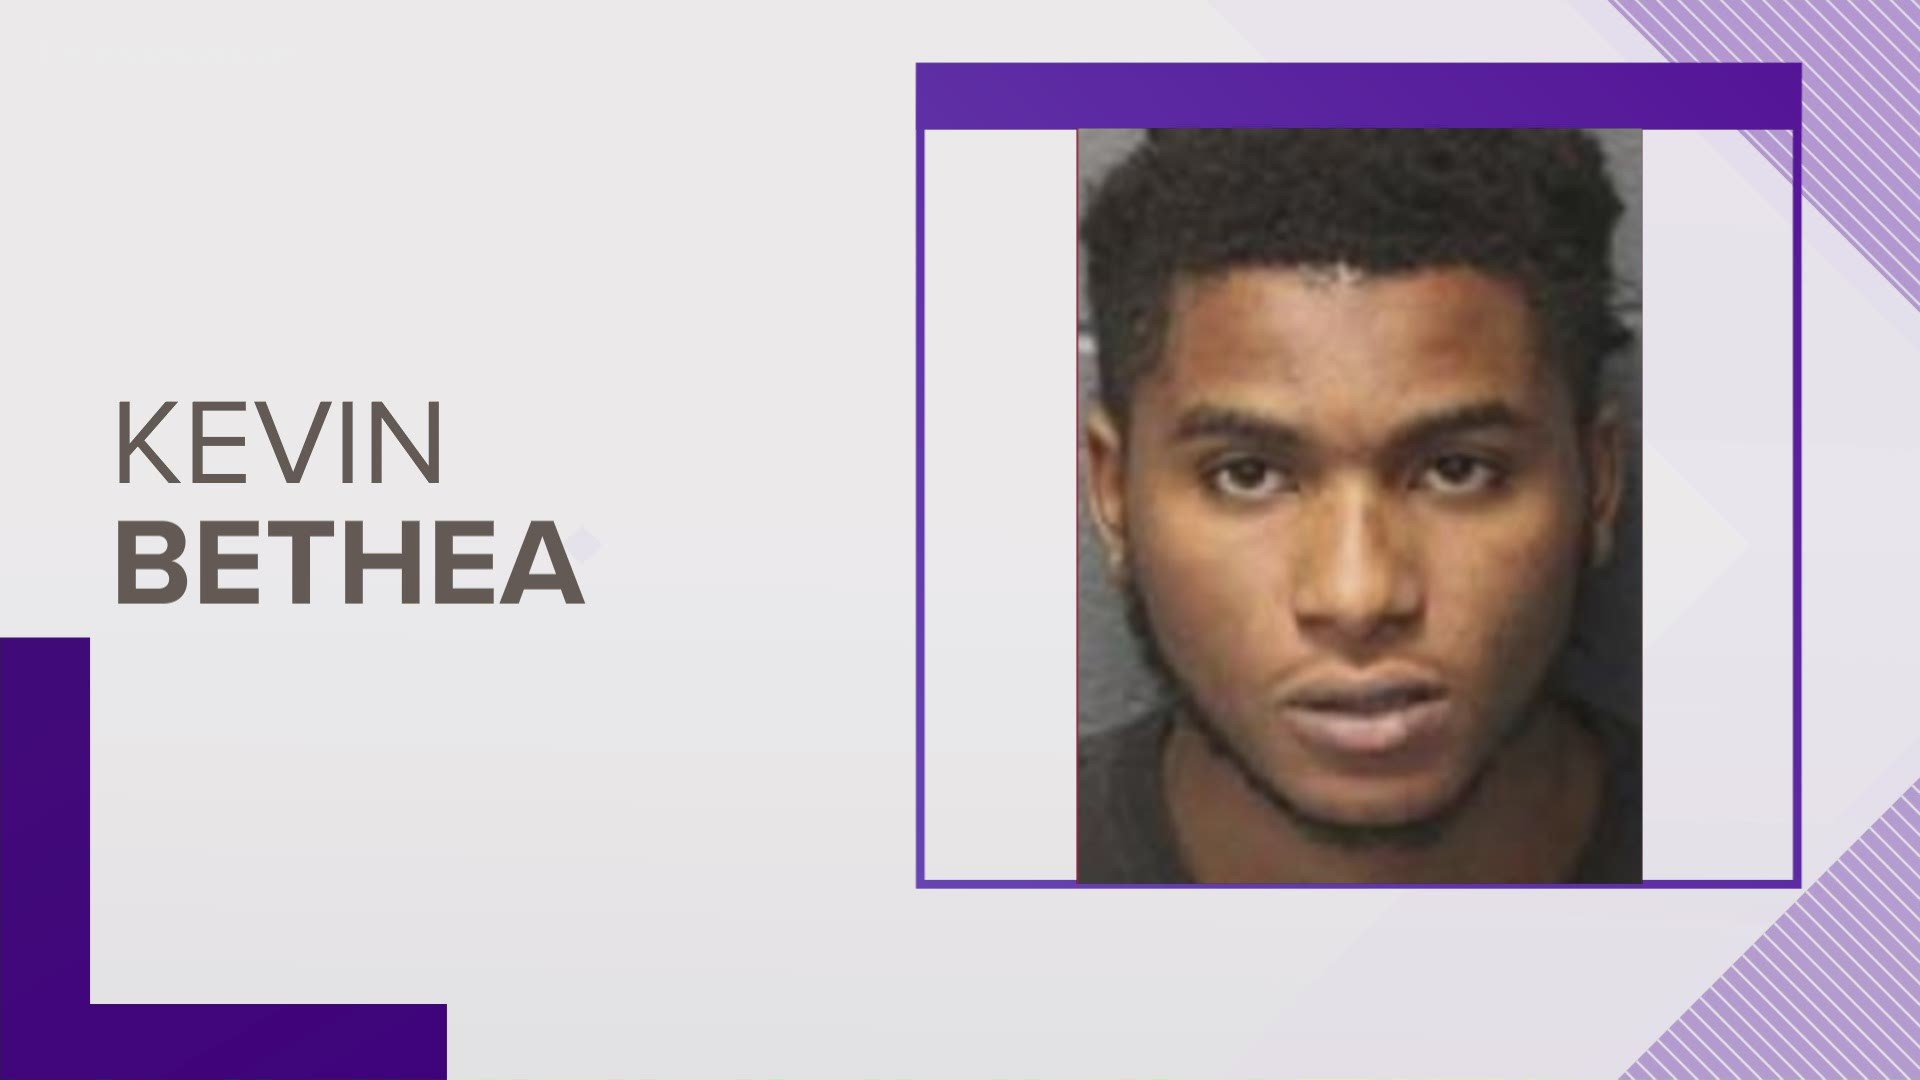 Officers said Kevin Lee Bethea, 22, kidnapped a woman one day and brutally assaulted an 83-year-old man another day.